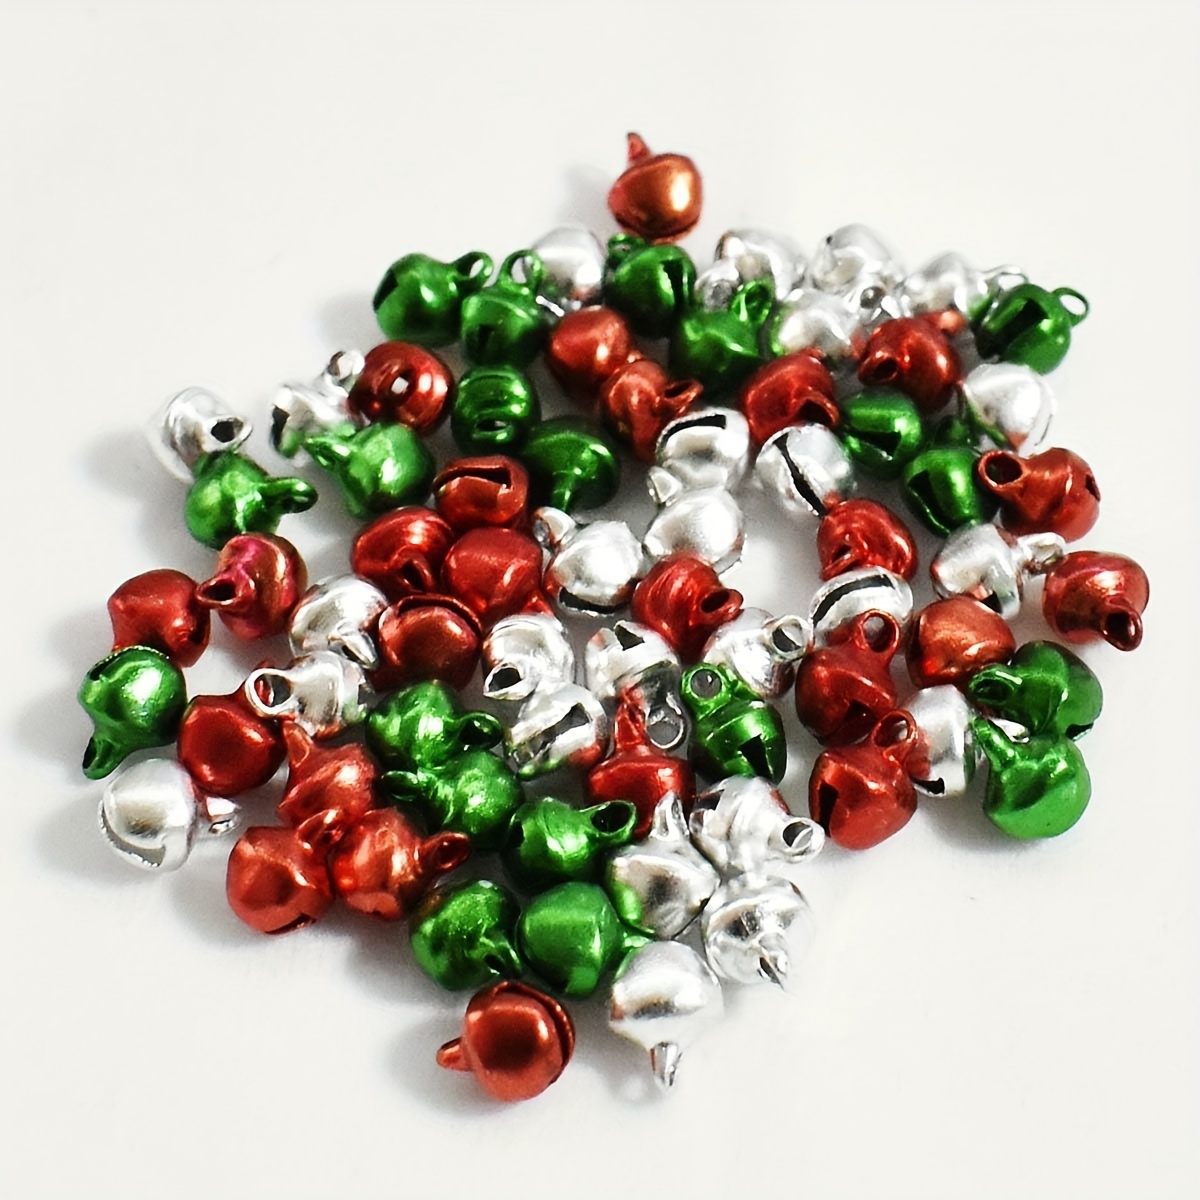 50pcs Yellow 22mm Mini Jingle Bells Keychains Decoration Accessories, Candy  Color Painted Metal Jingle Bells For Christmas Tree, Pet Collar Etc.